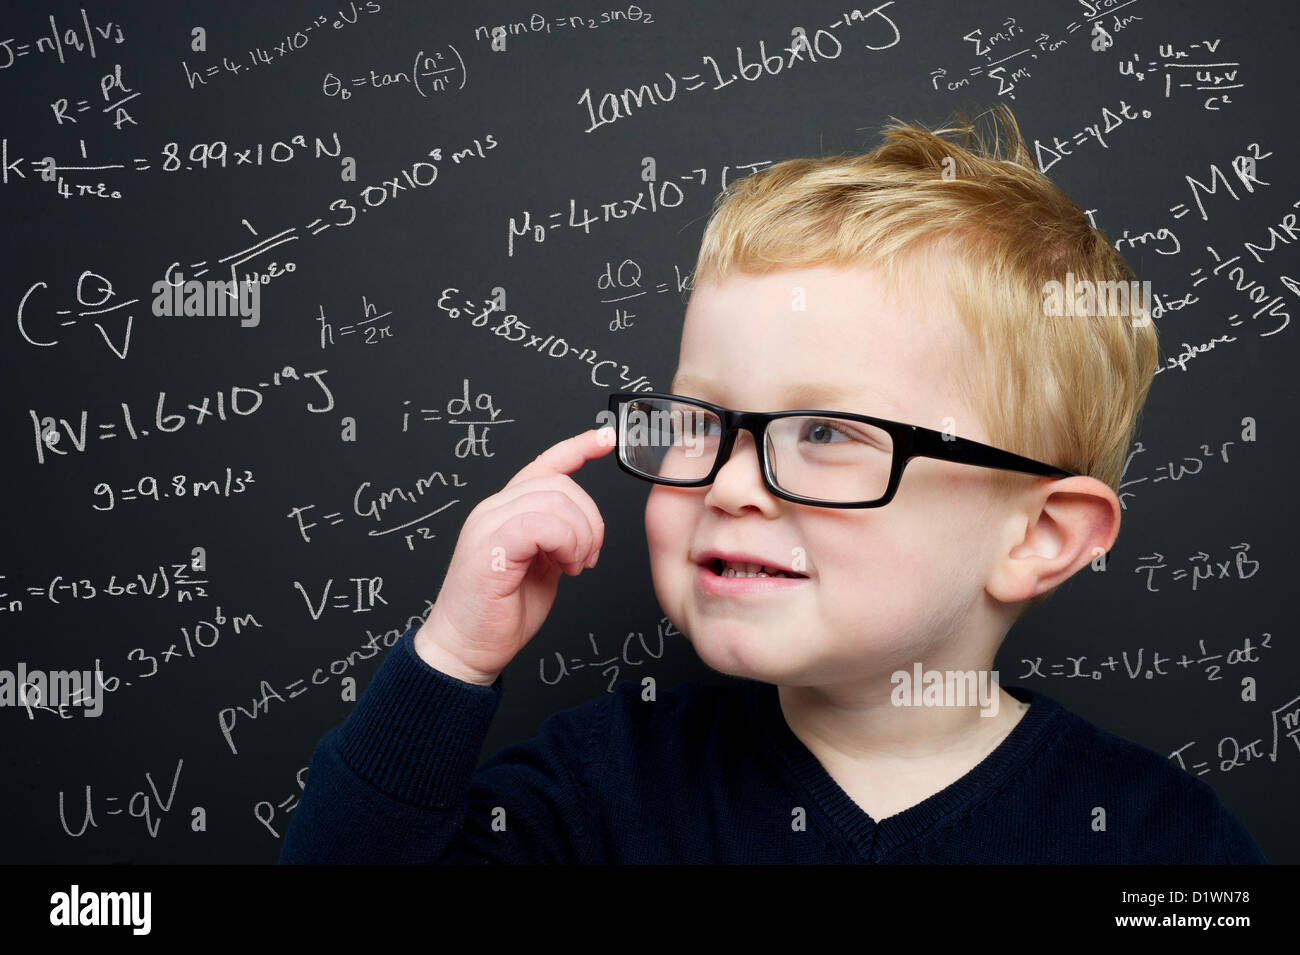 Smart young boy wearing navy blue jumper and glasses stood in front of a blackboard filled with scientific theories & equations Stock Photo